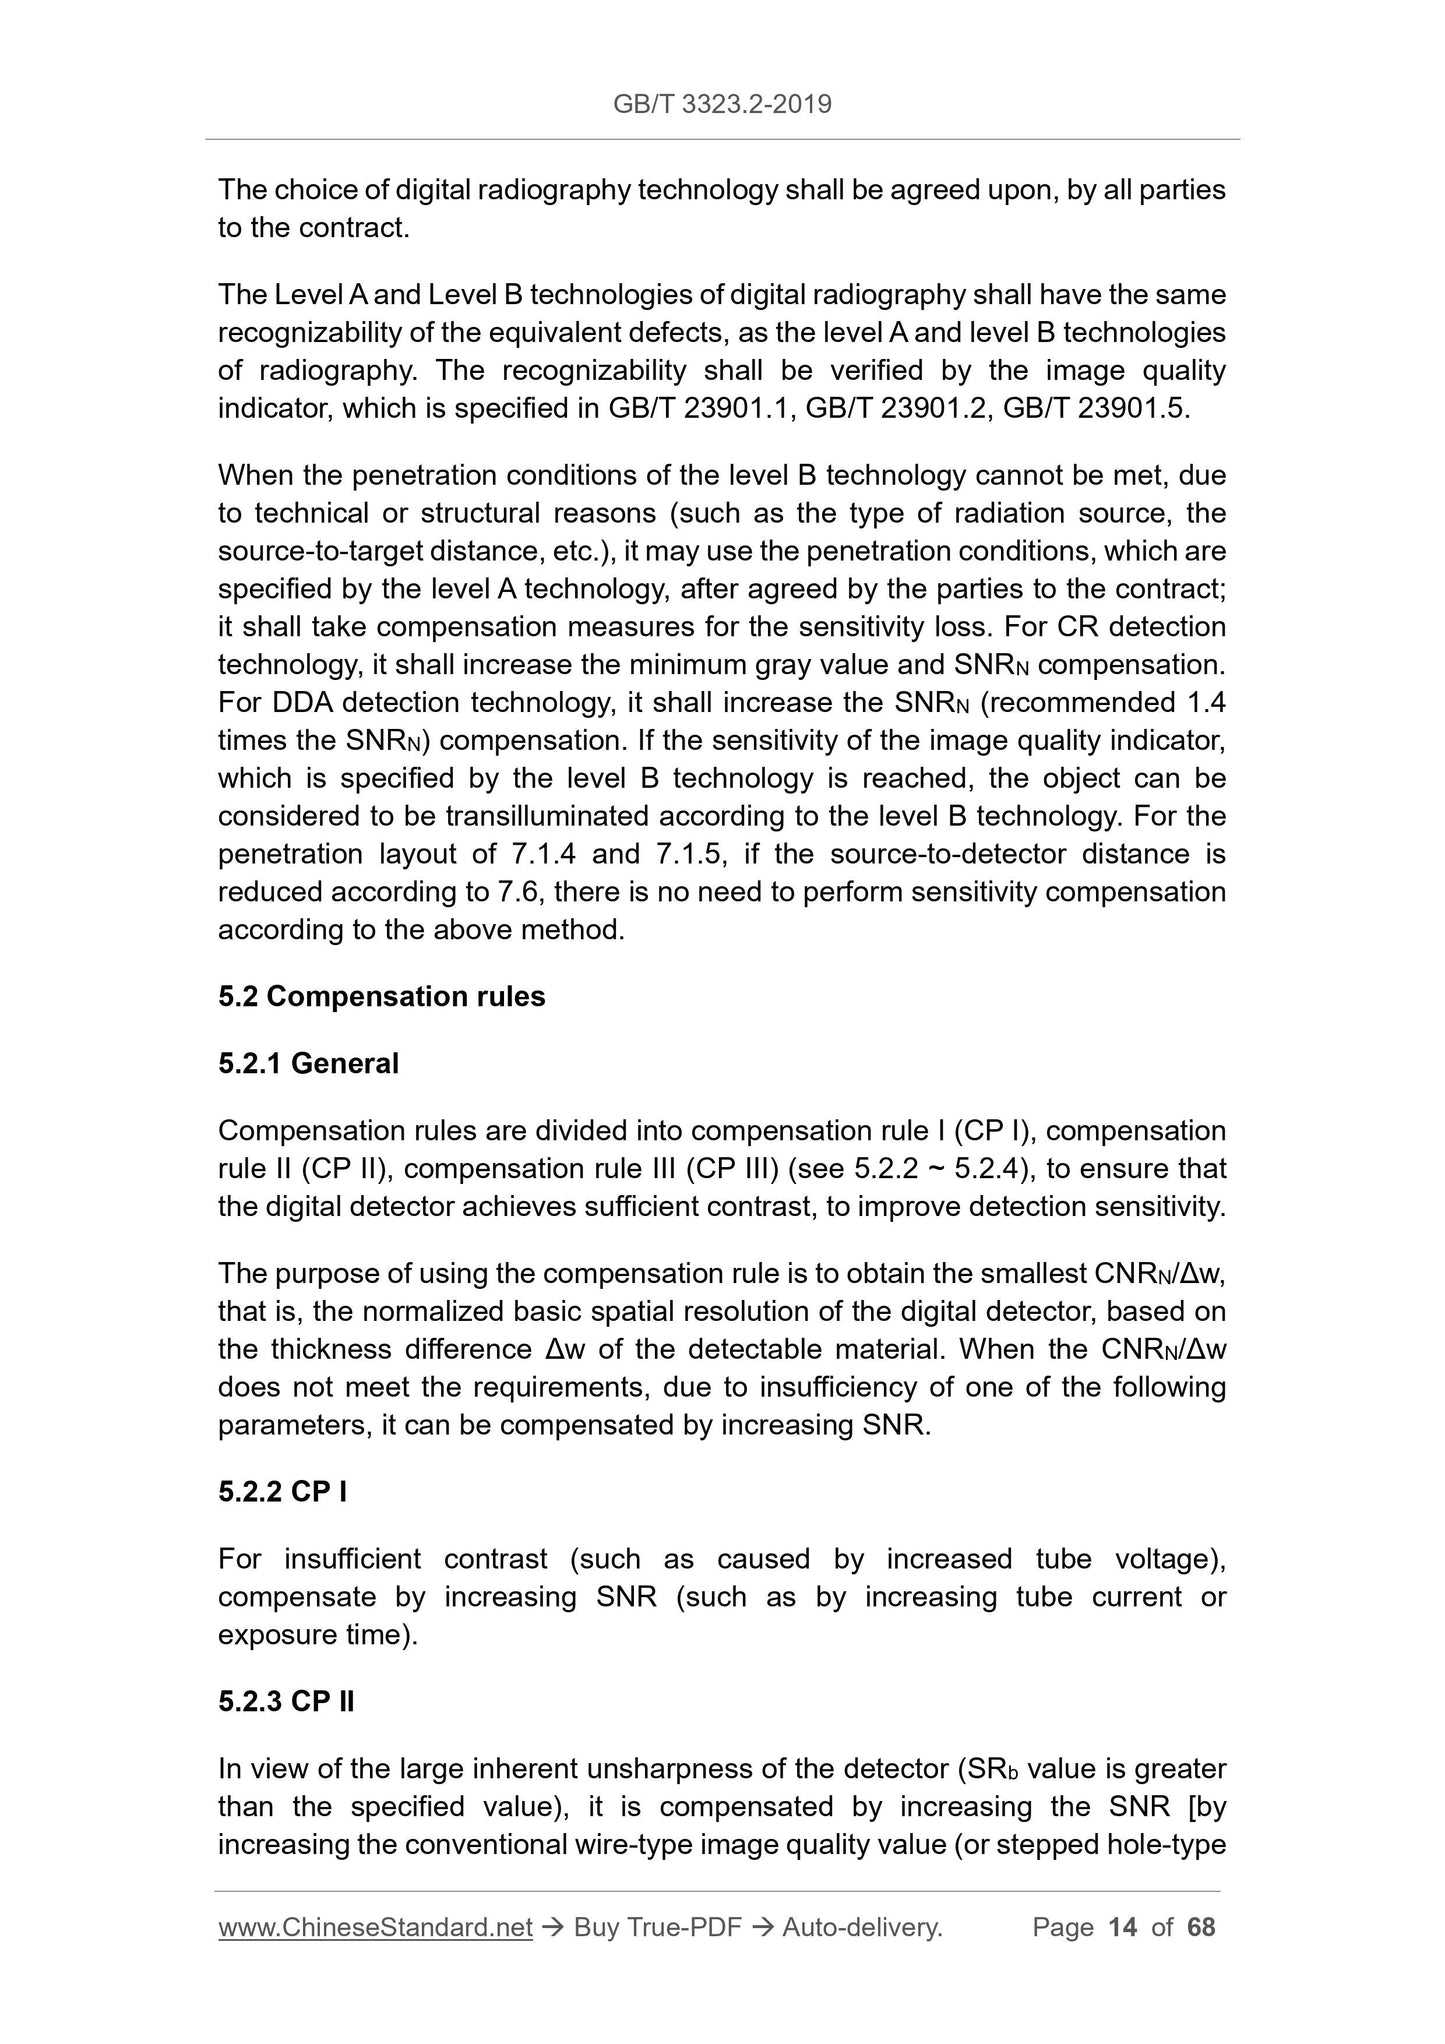 GB/T 3323.2-2019 Page 4